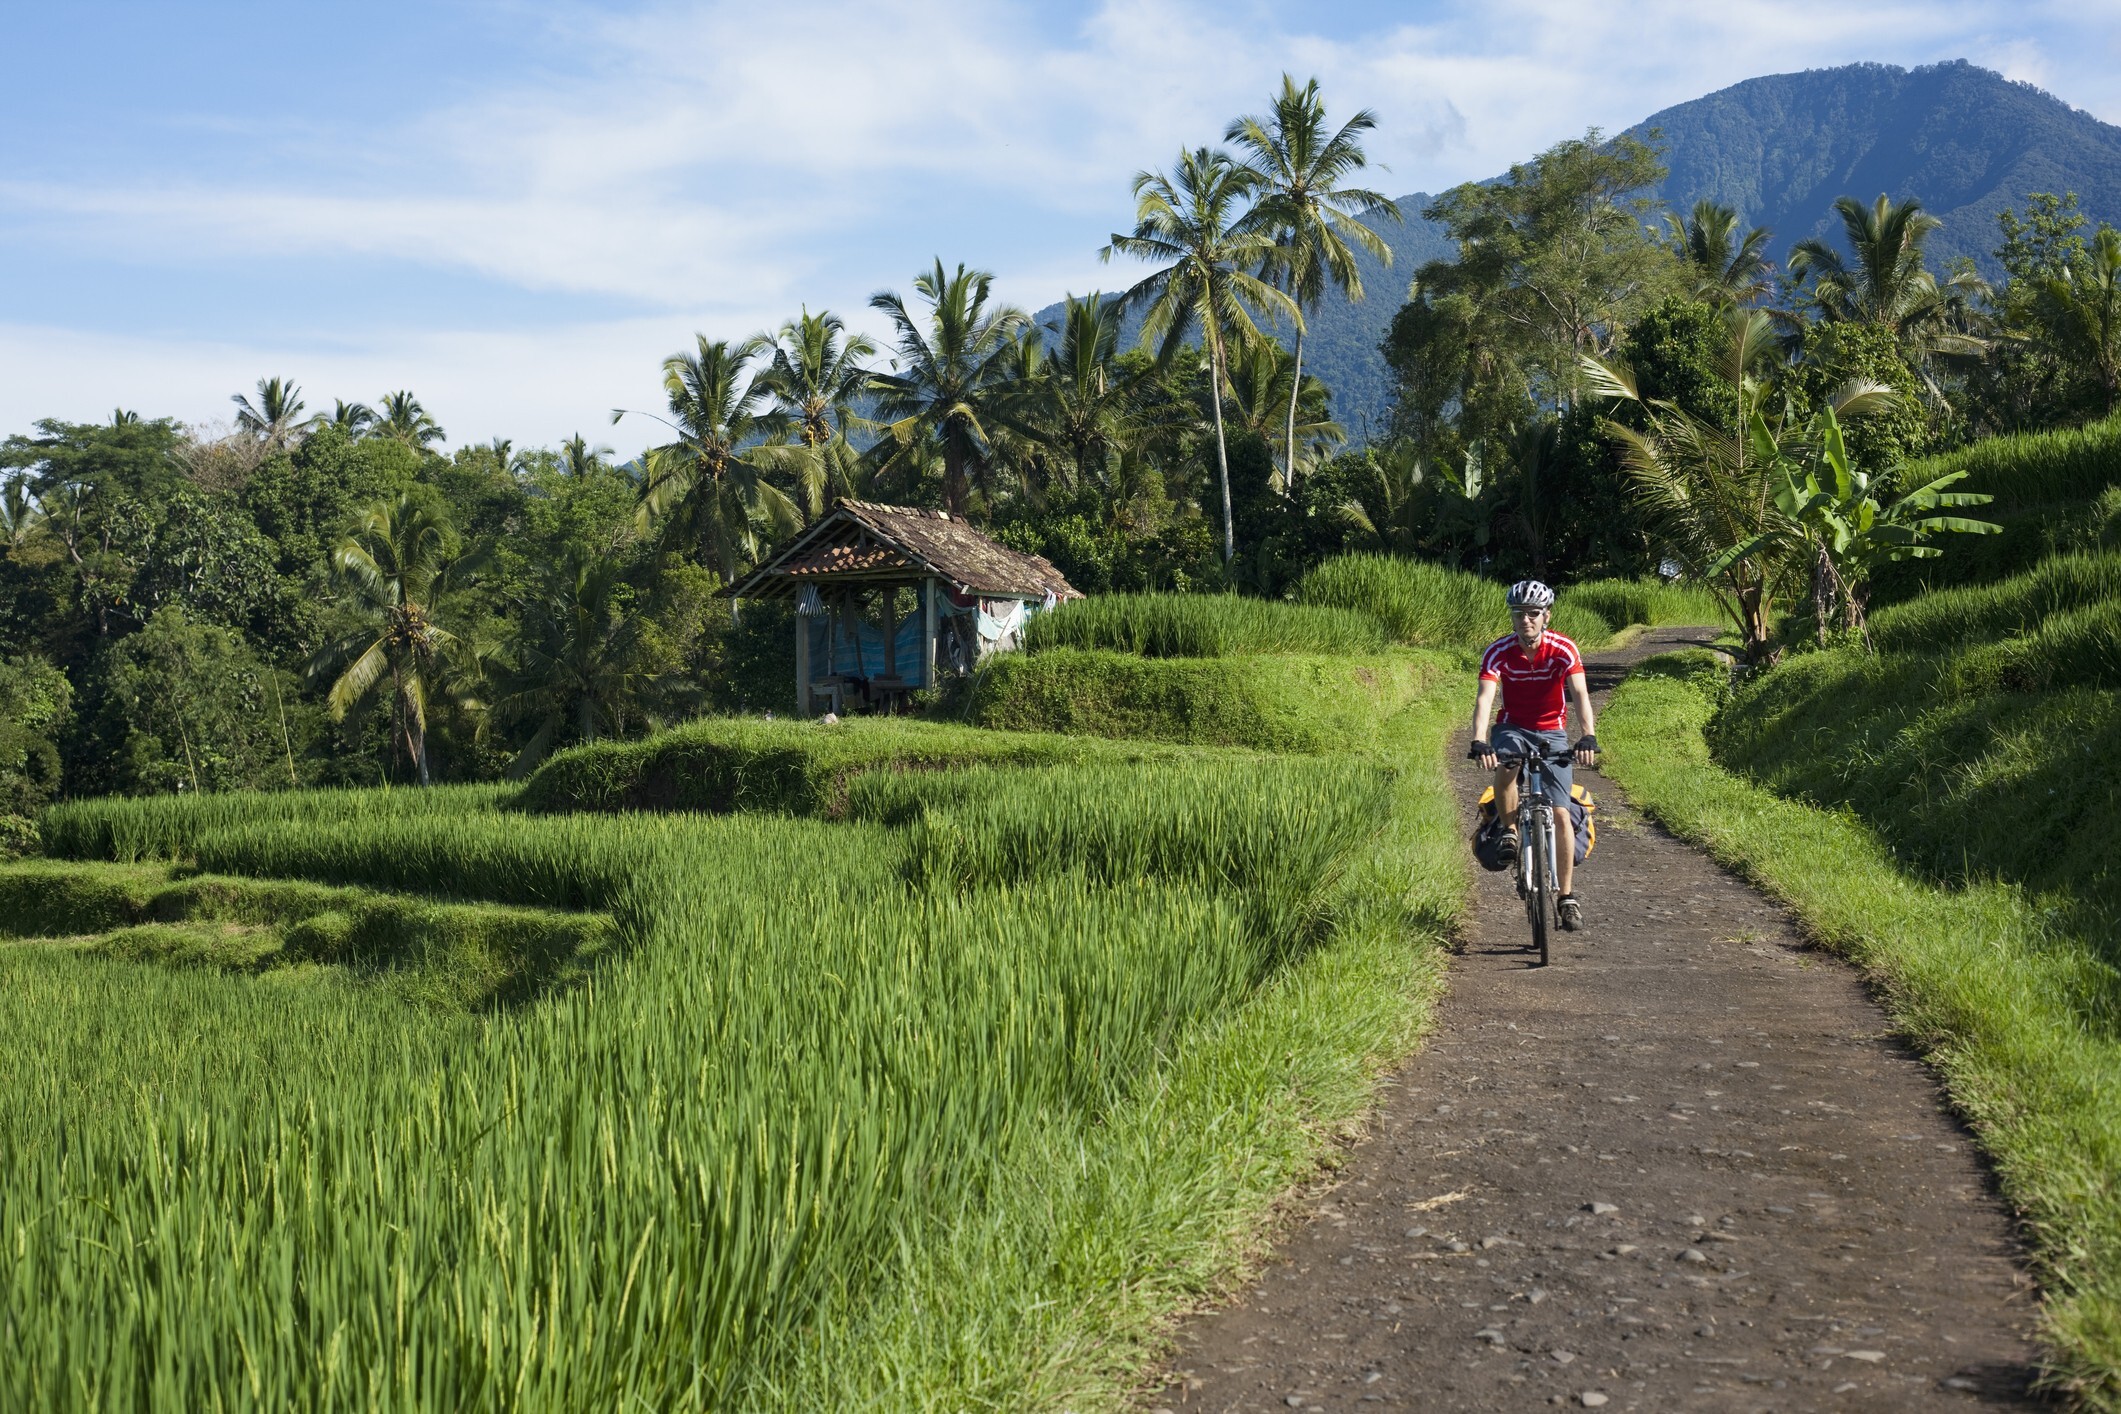 Bali is free of tourists so it is the perfect time for a bike trip. Photo: Getty Images